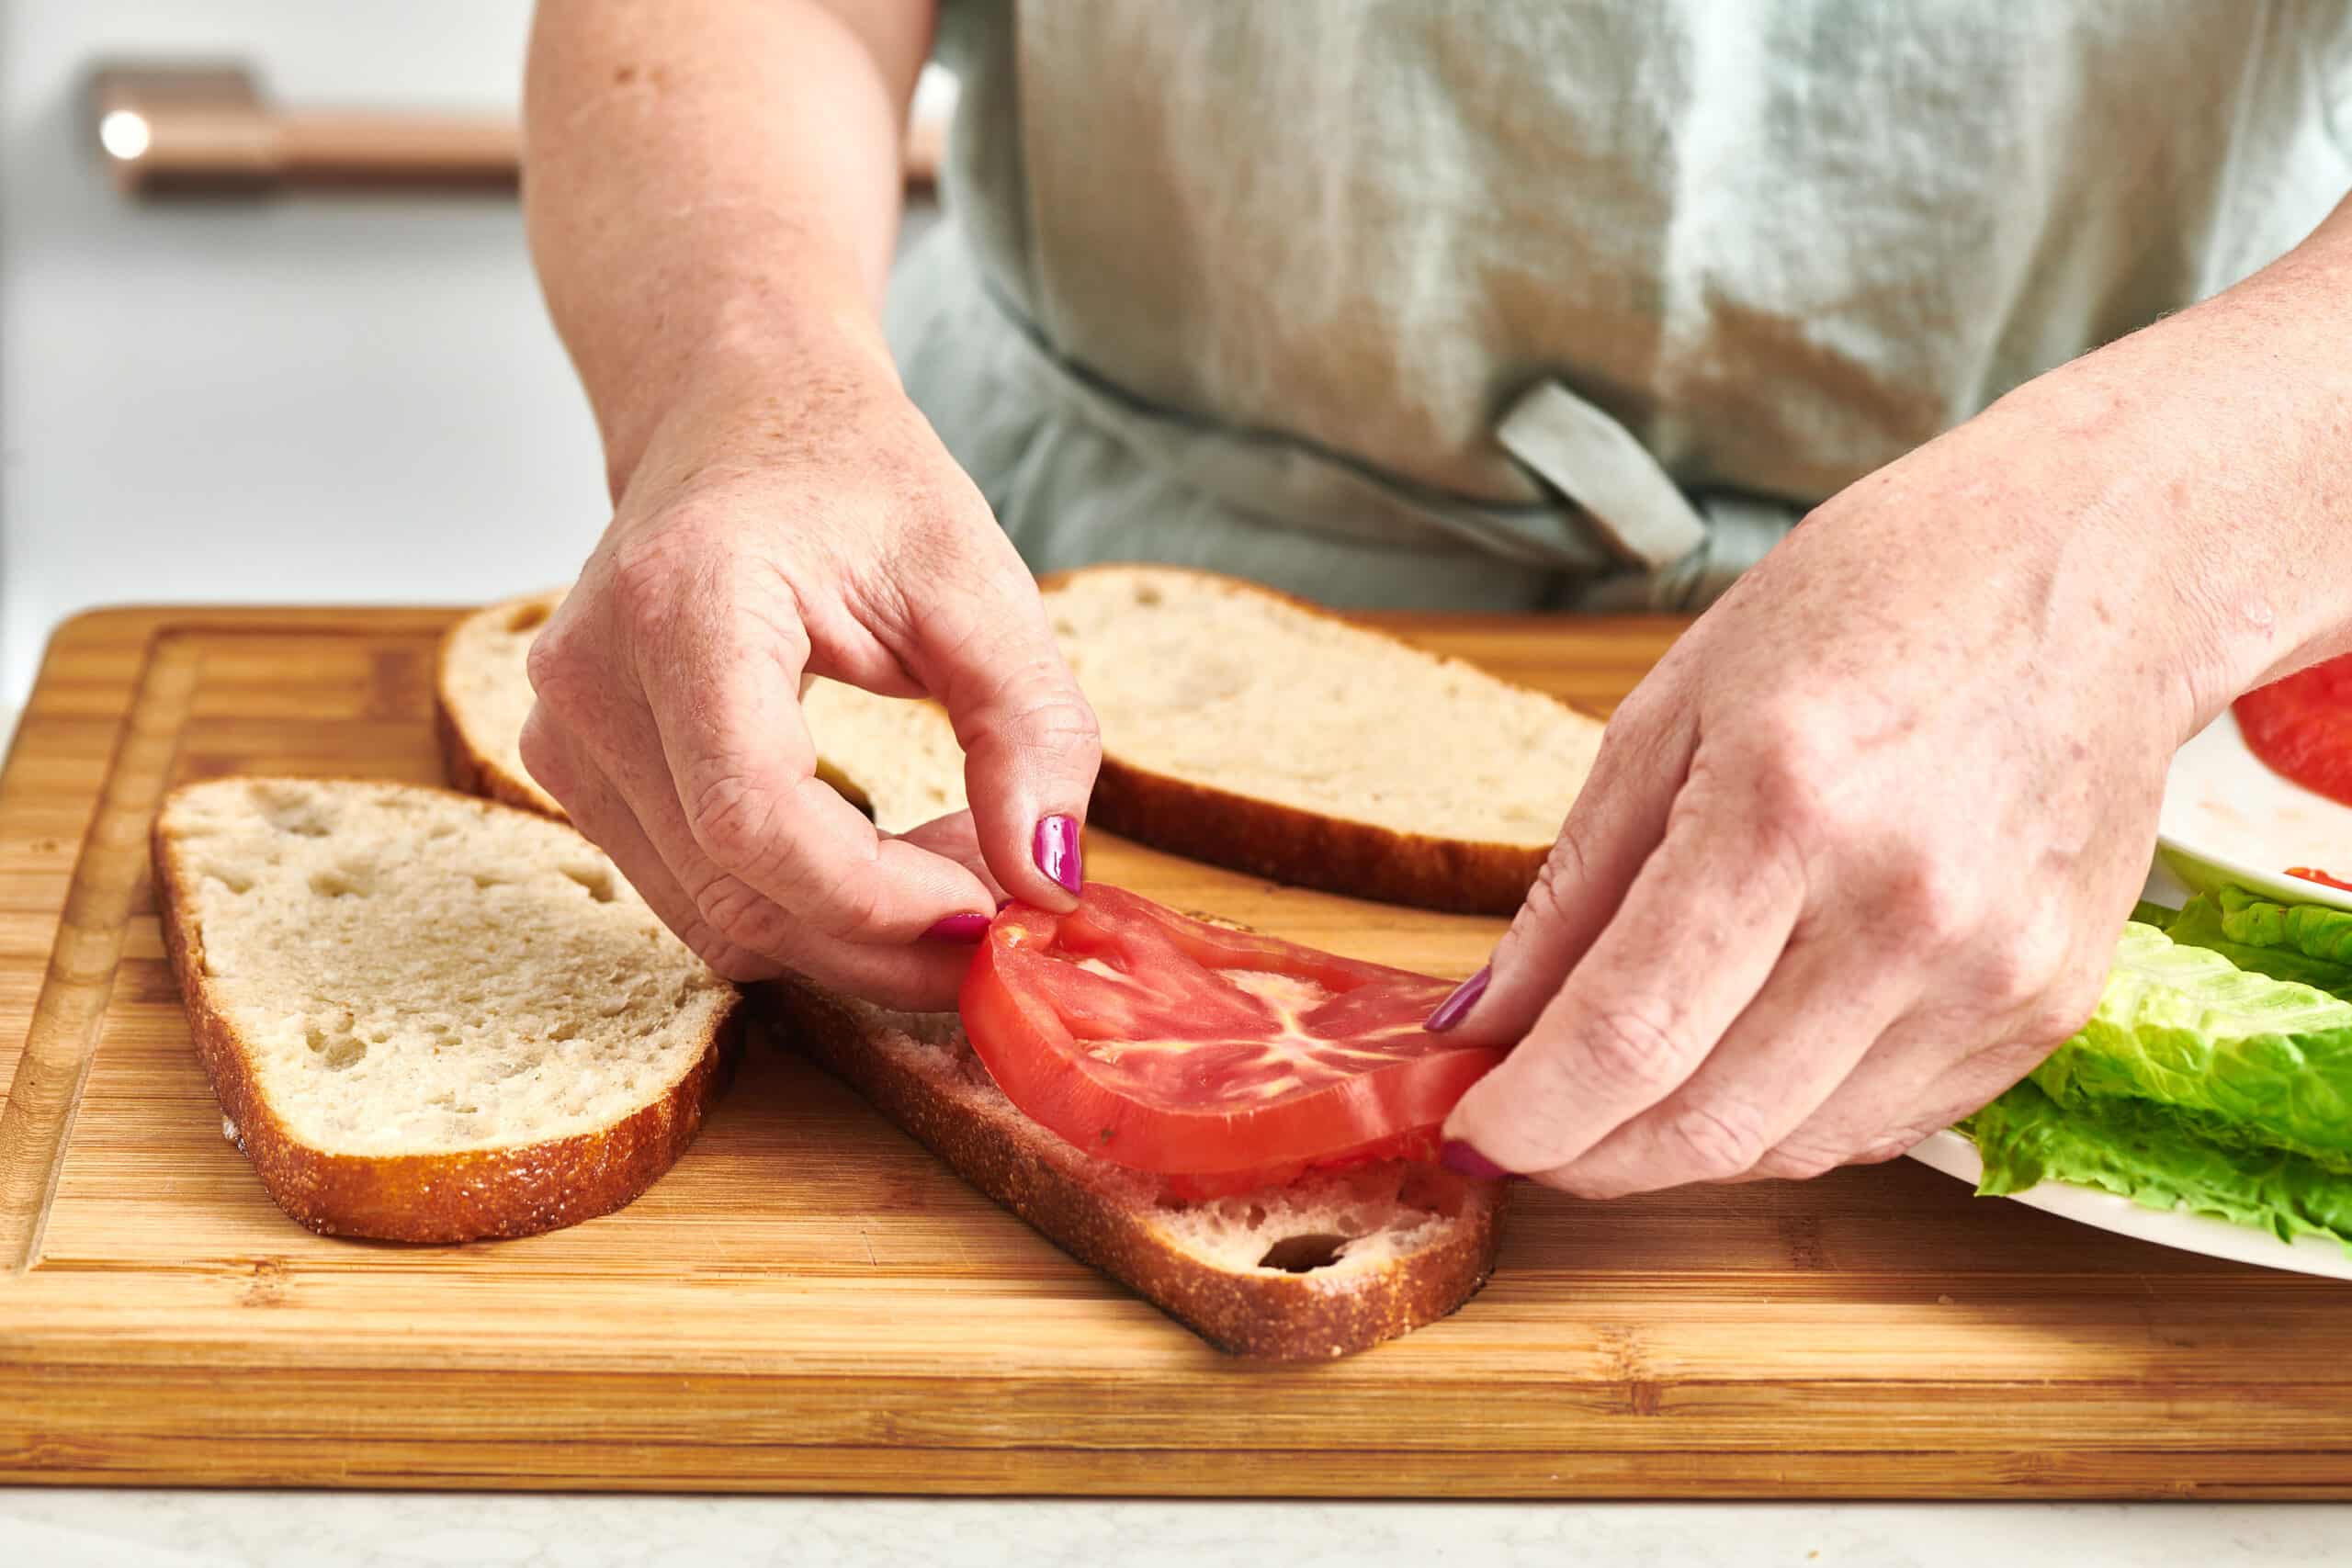 A woman's hands placing a slice of red tomato on a piece of bread on a cutting board.